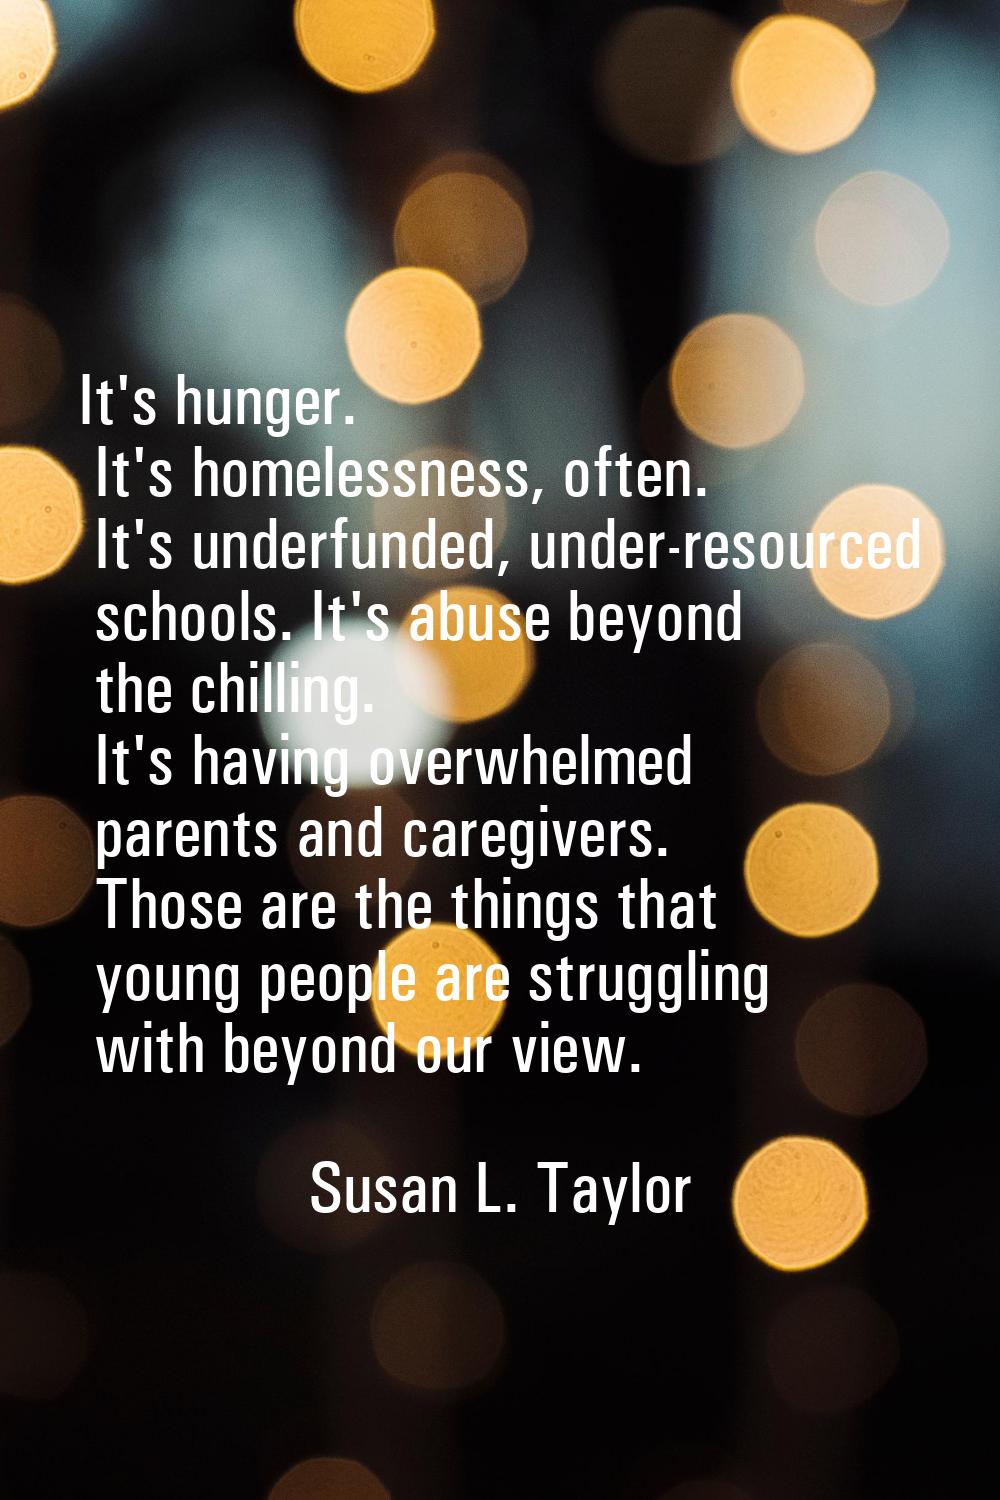 It's hunger. It's homelessness, often. It's underfunded, under-resourced schools. It's abuse beyond